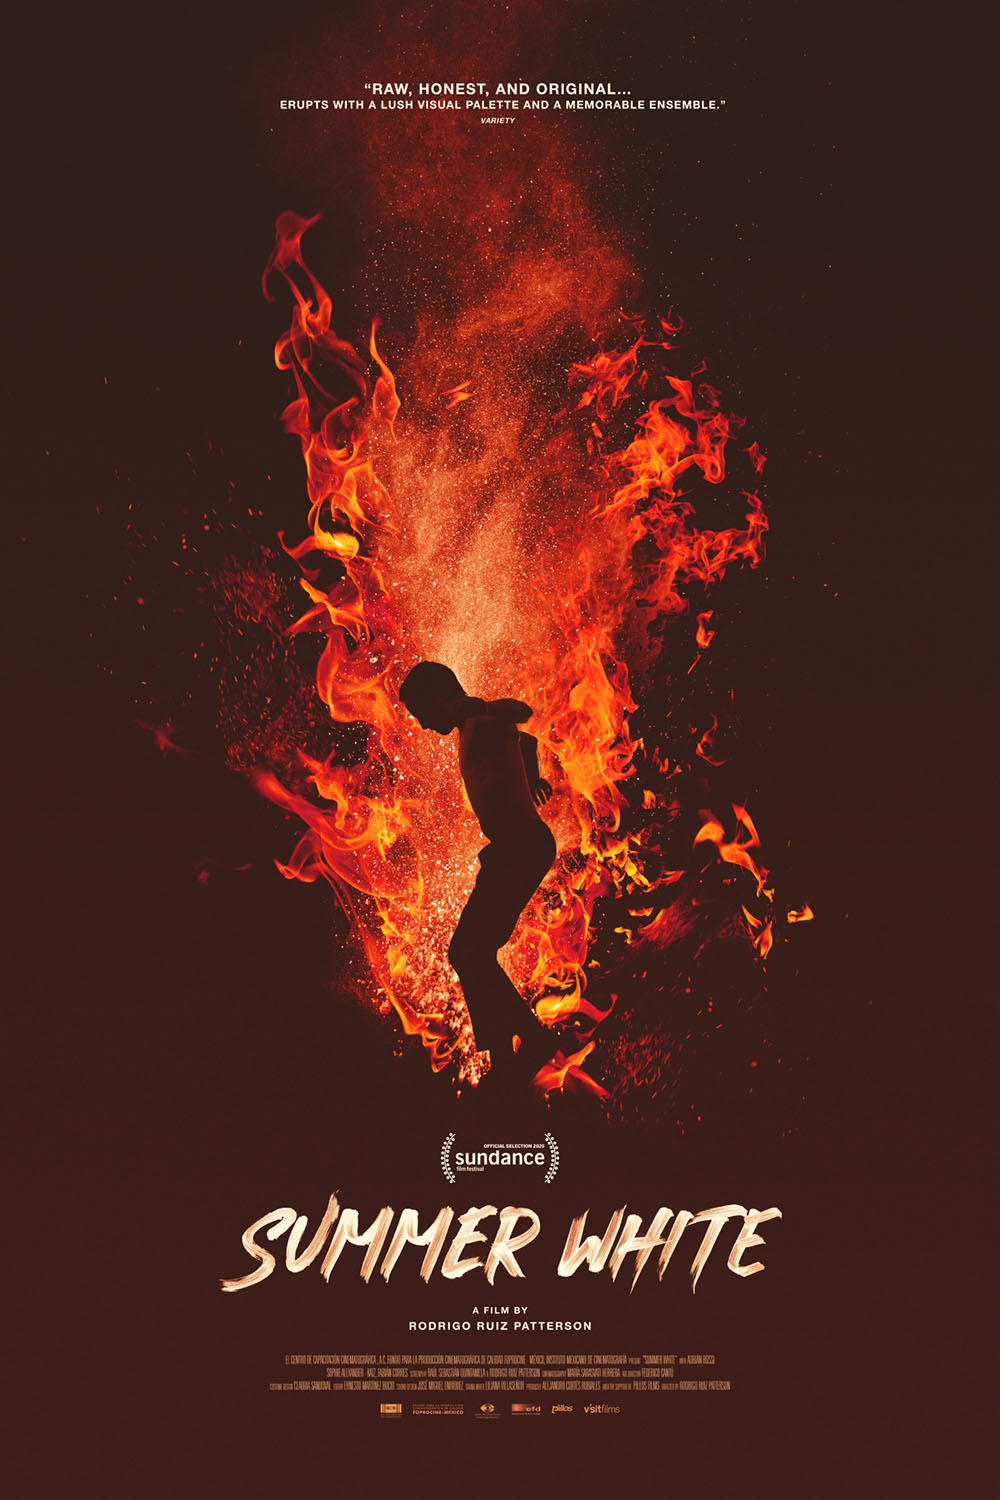 Movie poster for Summer White, figure standing in flames